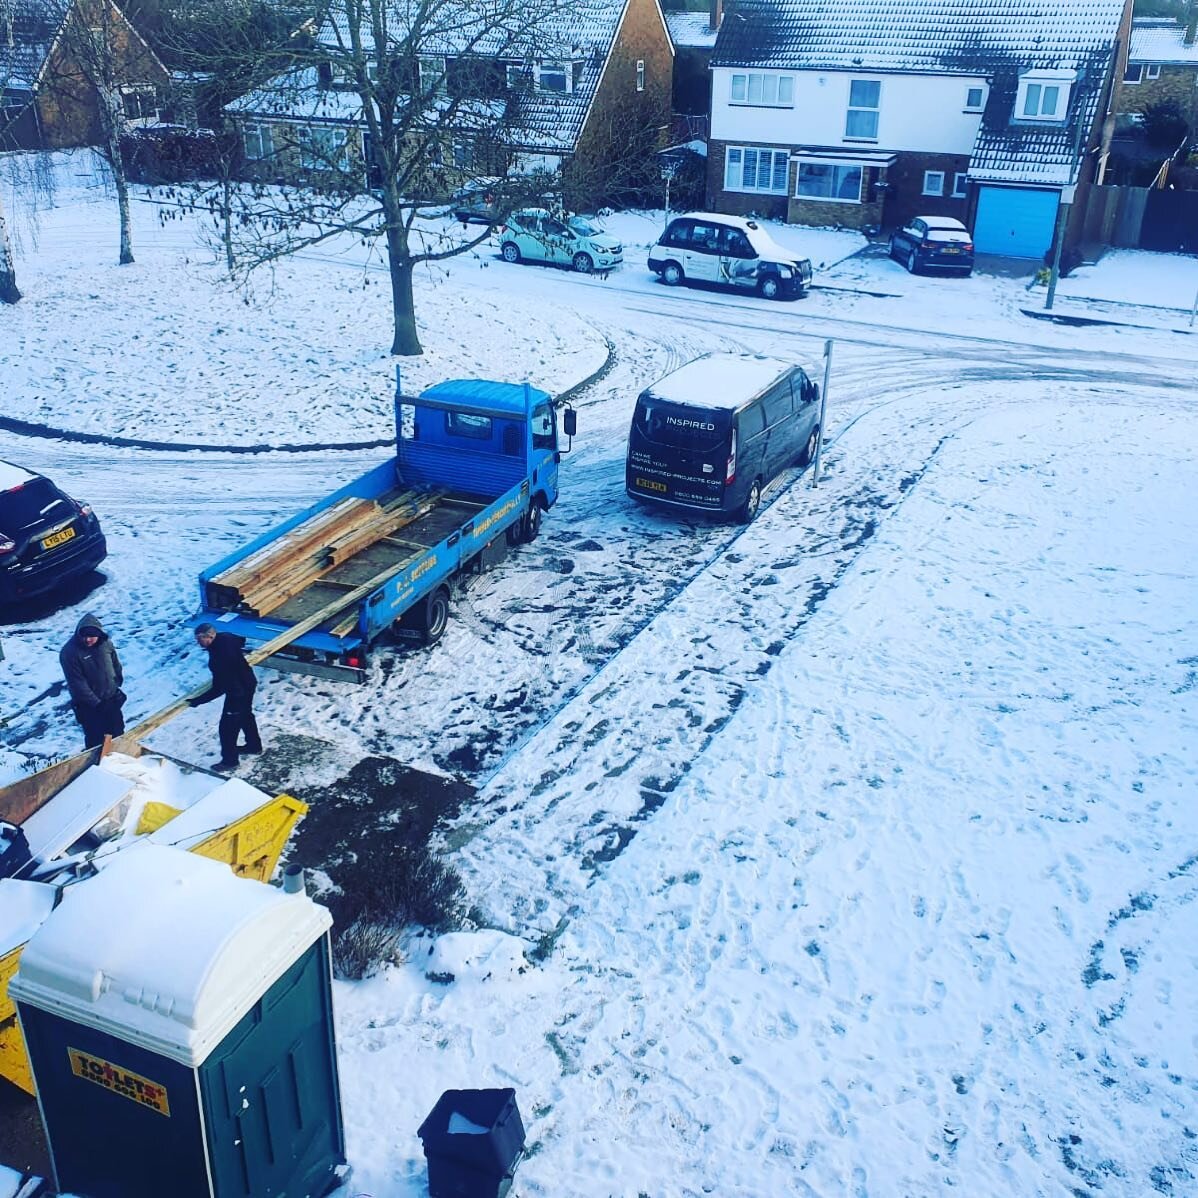 This mornings delivery for our loft materials from pj supplies in Orpington 💪🏻 
Snow is really bad today. 
Wish I could build a loft from the van or home 😂 soooo cold 🥶 
#builder #building #local #localtrade #localtradesman #loft #loftspace #loft